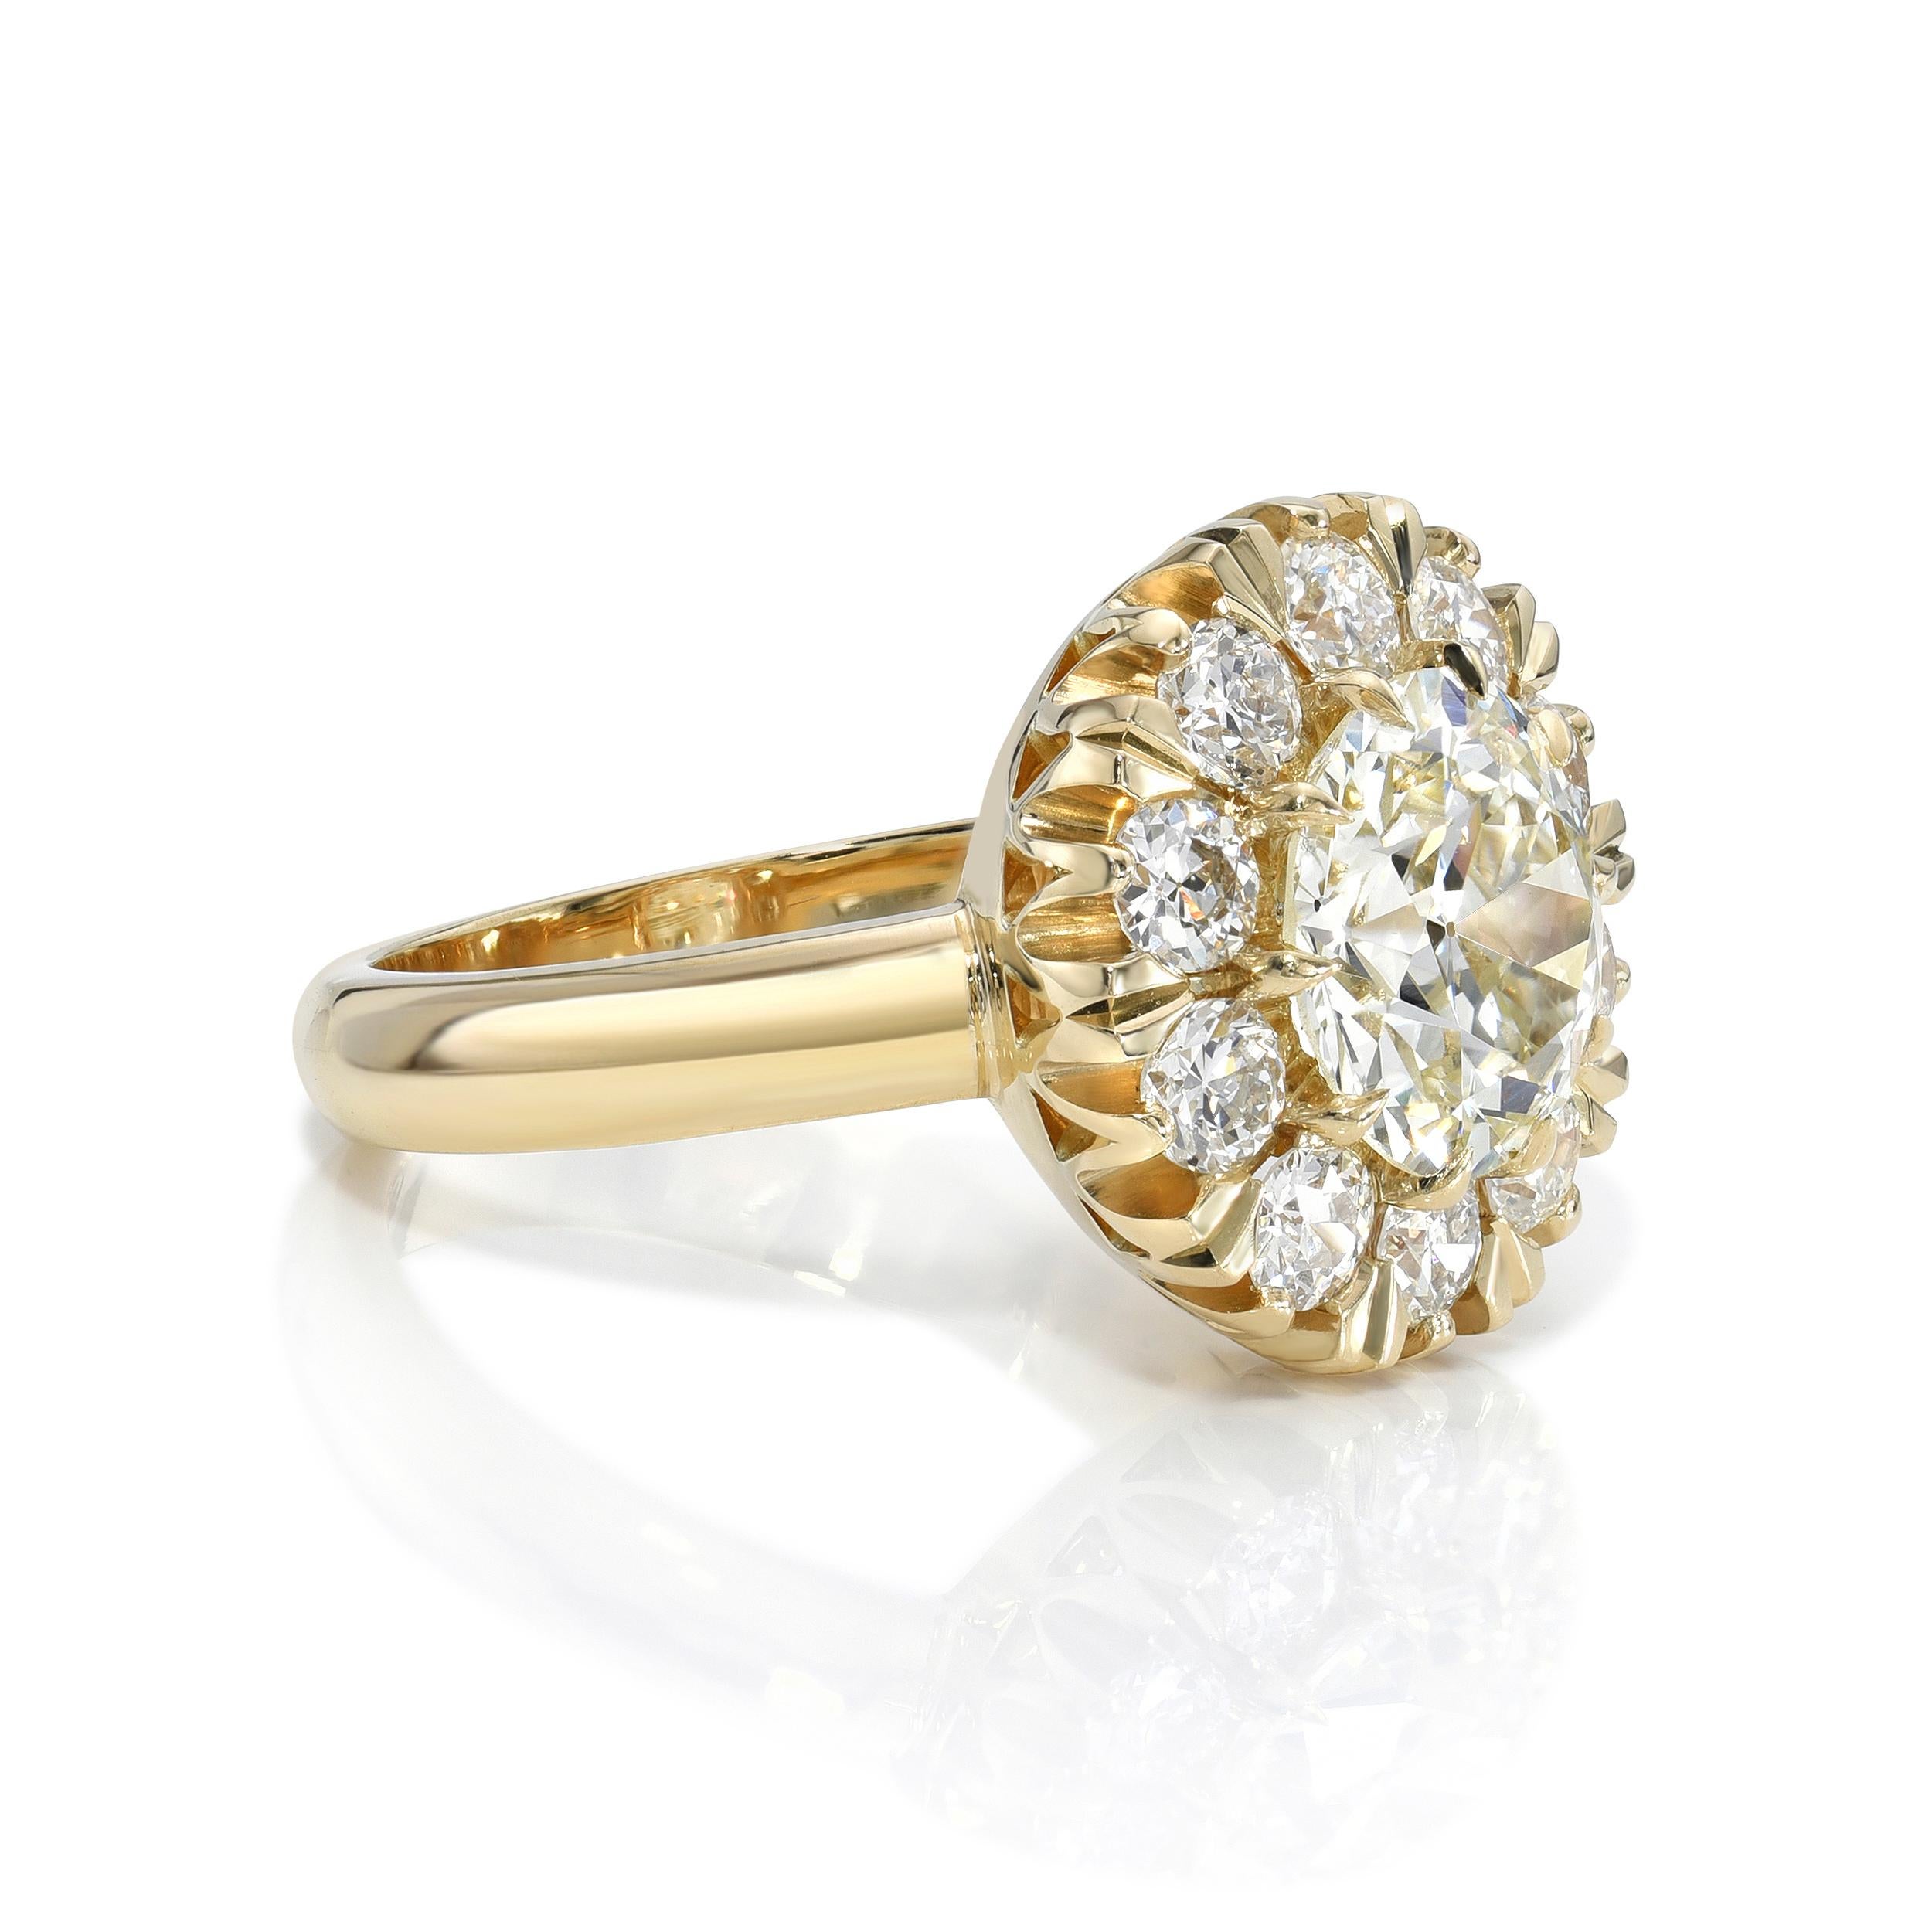 2.22ct N/VVS2 GIA certified old European cut diamond with 0.96ctw old European cut accent diamonds prong set in a handcrafted 18K yellow gold mounting.